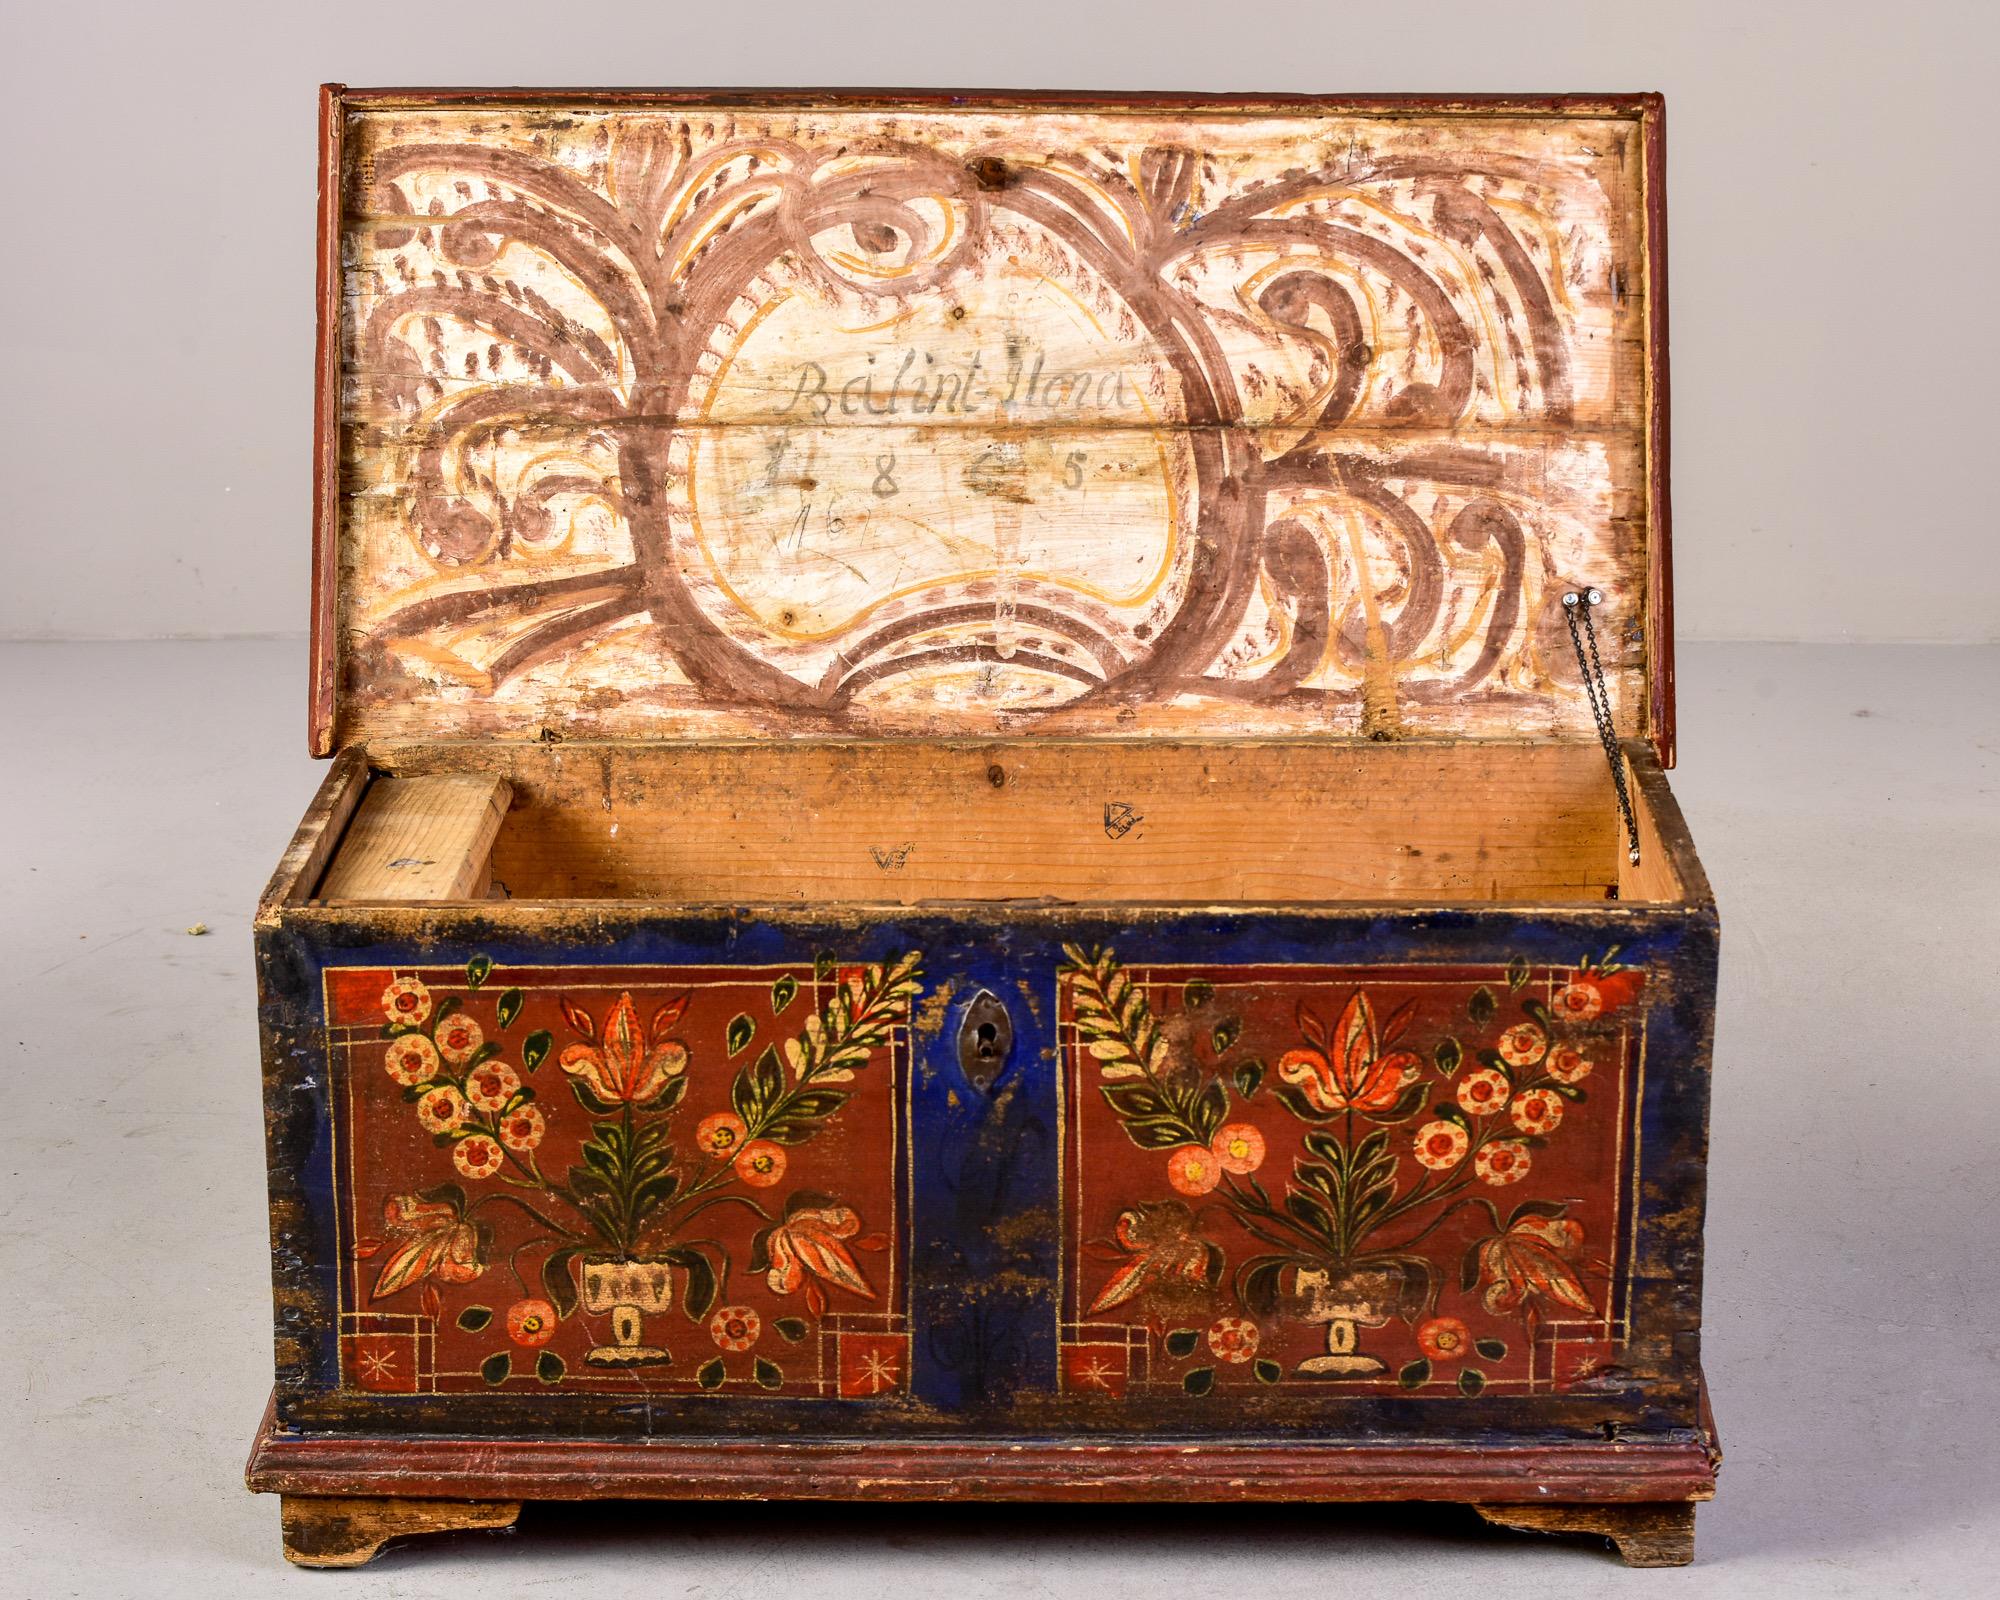 Hand-Painted Mid 19th Century Hand Painted Romanian Painted Trunk